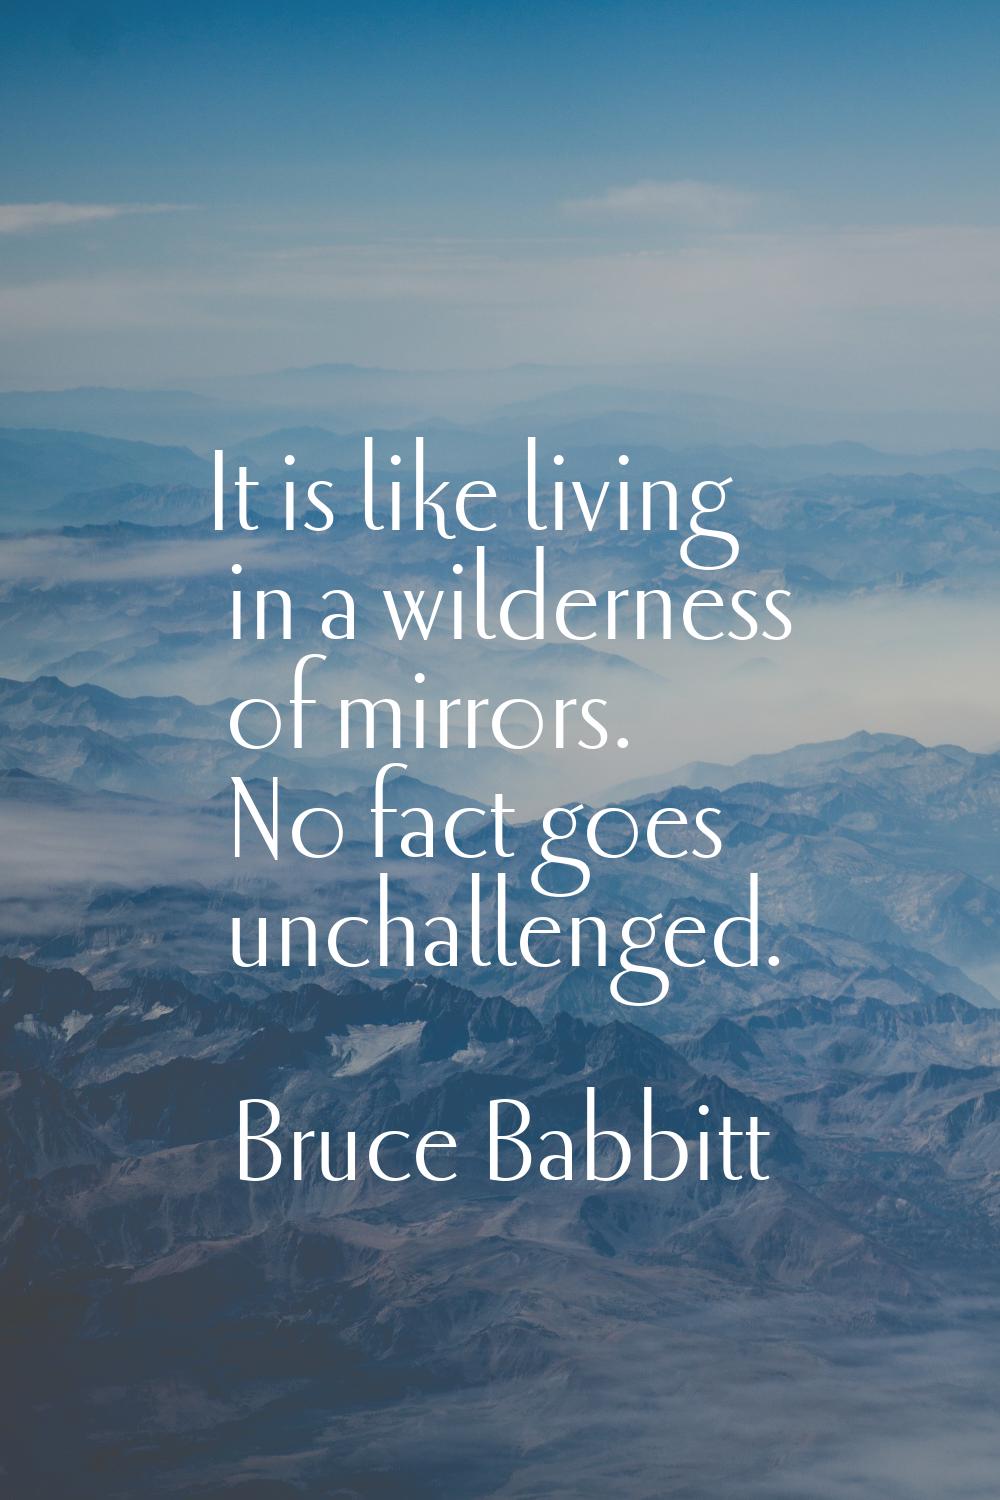 It is like living in a wilderness of mirrors. No fact goes unchallenged.